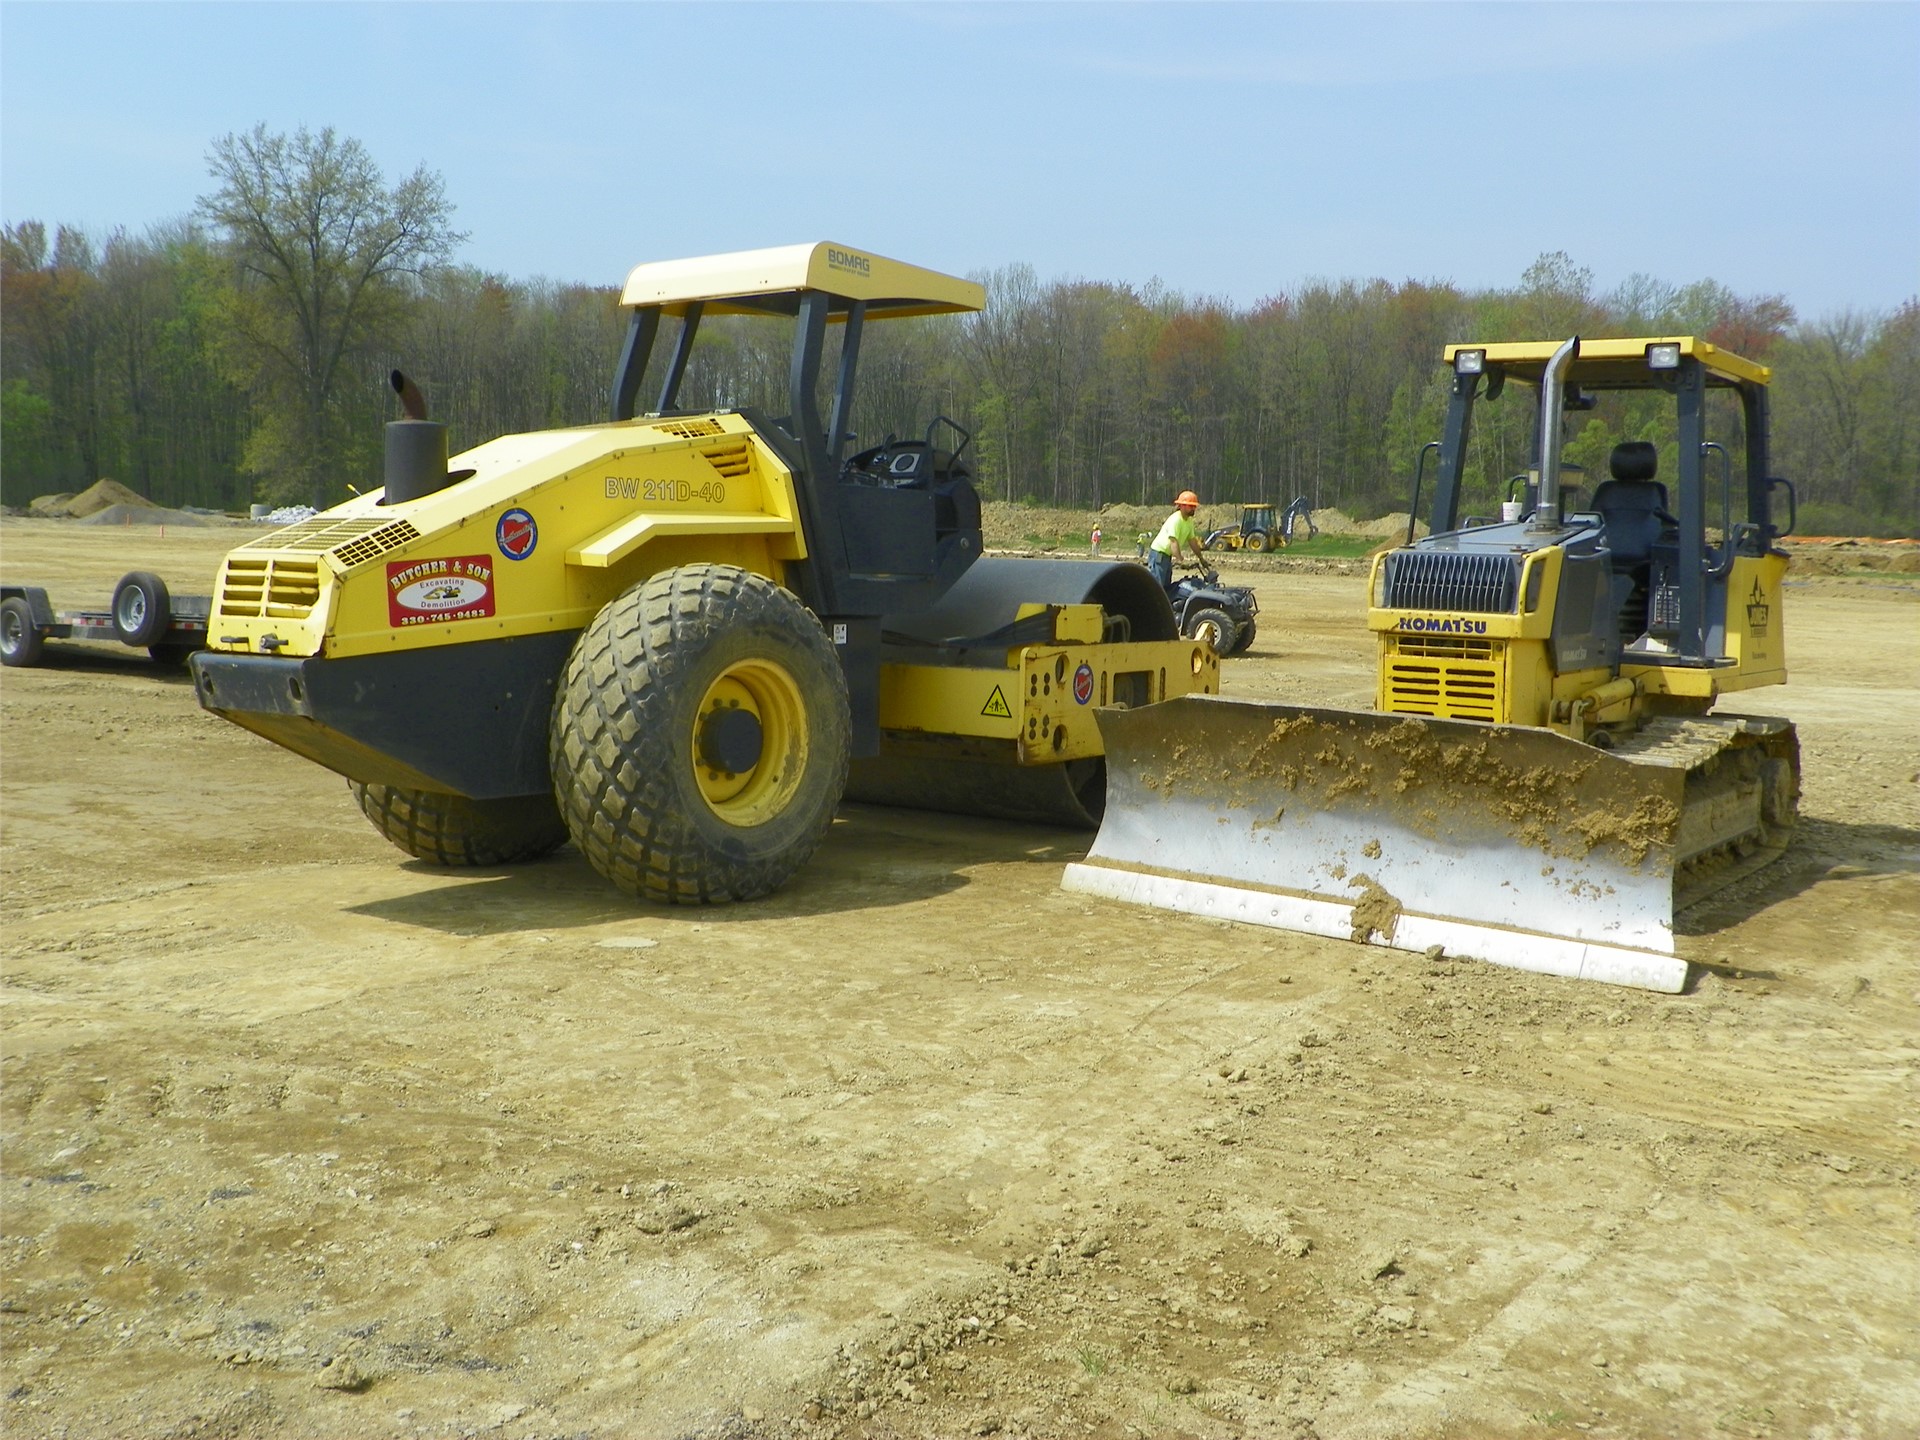 Earth mover and roller to flatten pads and roll out field